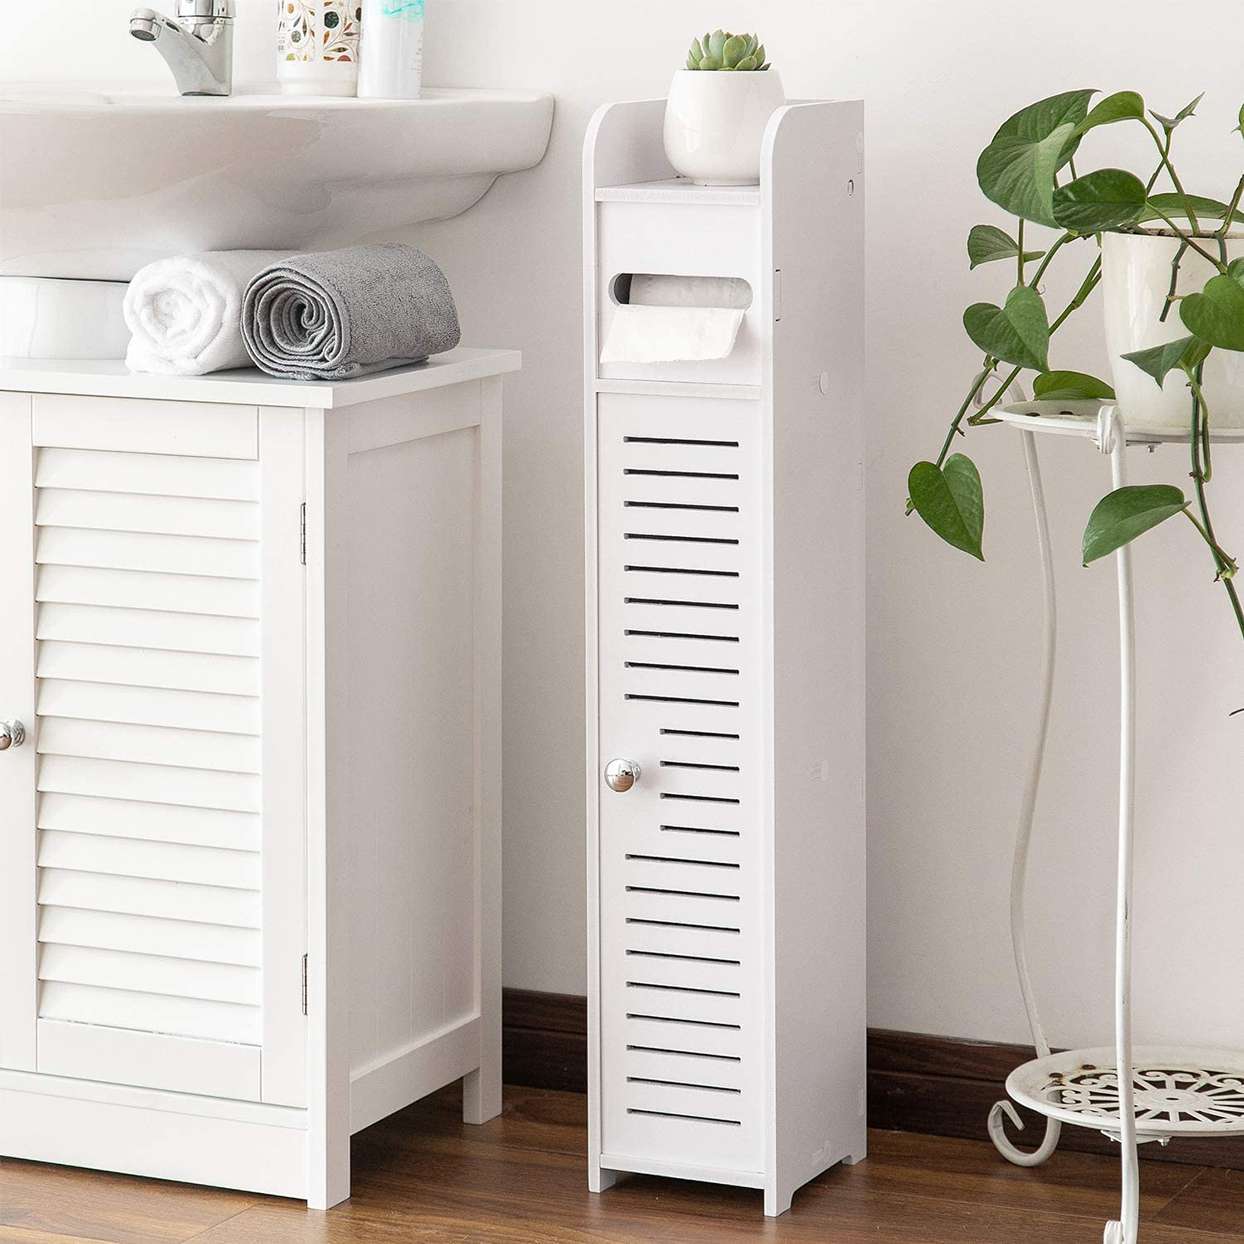 Storage Cabinet From, Thin Bathroom Shelving Unit